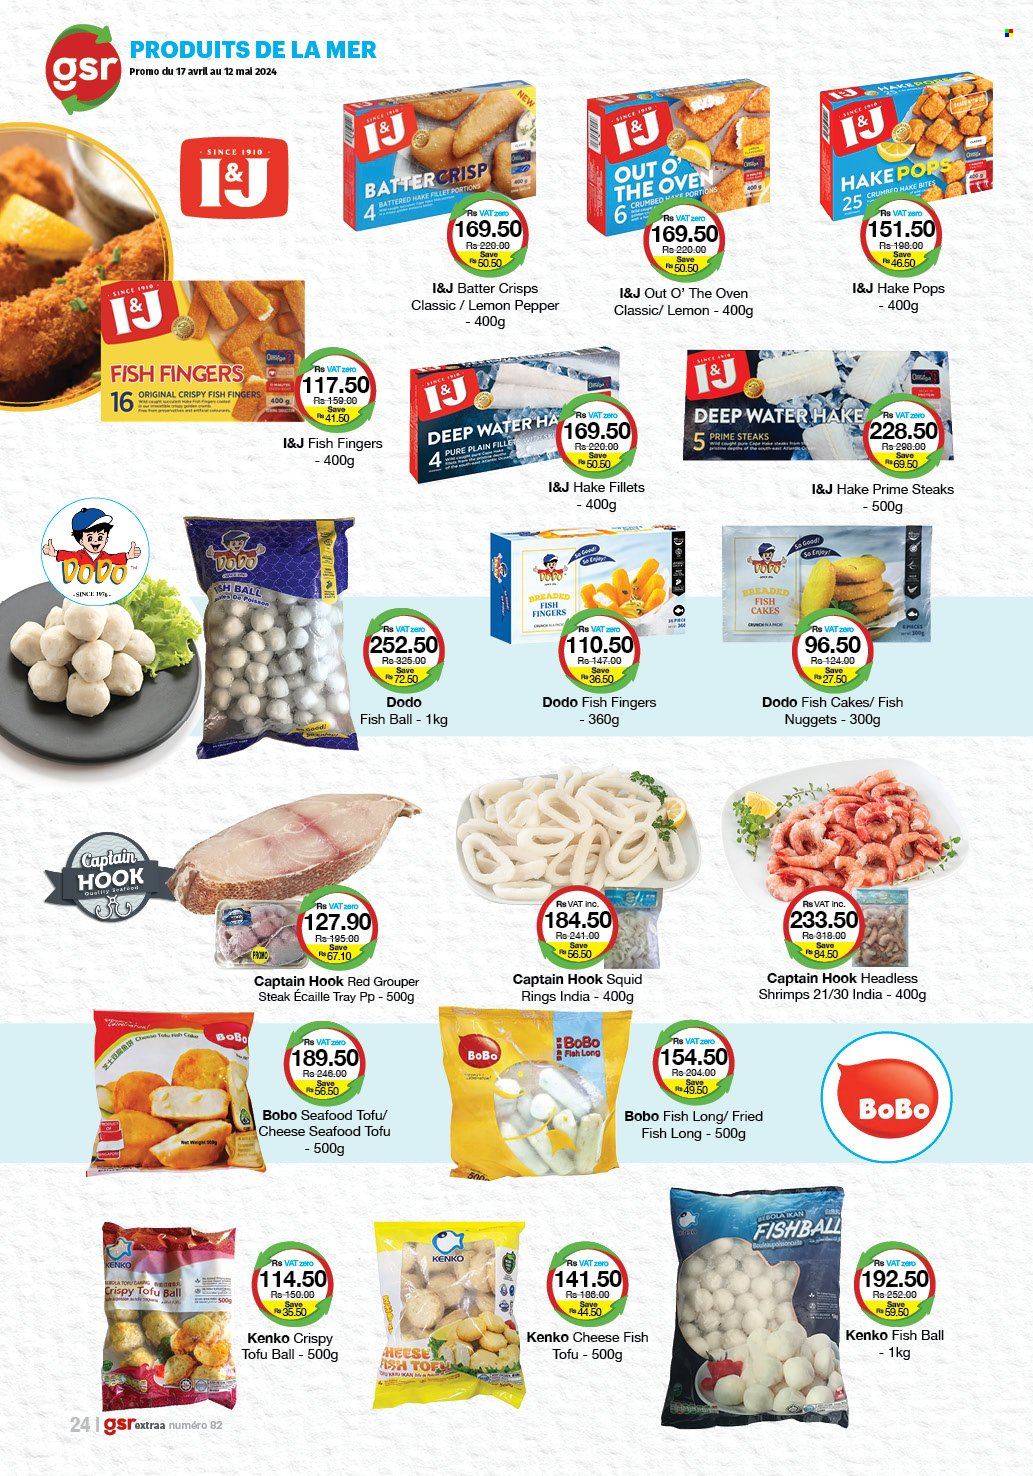 thumbnail - GSR Catalogue - 17.04.2024 - 12.05.2024 - Sales products - grouper, squid, seafood, hake, shrimps, fish nuggets, squid rings, fried fish, hake fillet, fish fingers, breaded fish, Out o' the Oven, fish cake, crisps, water, steak. Page 24.